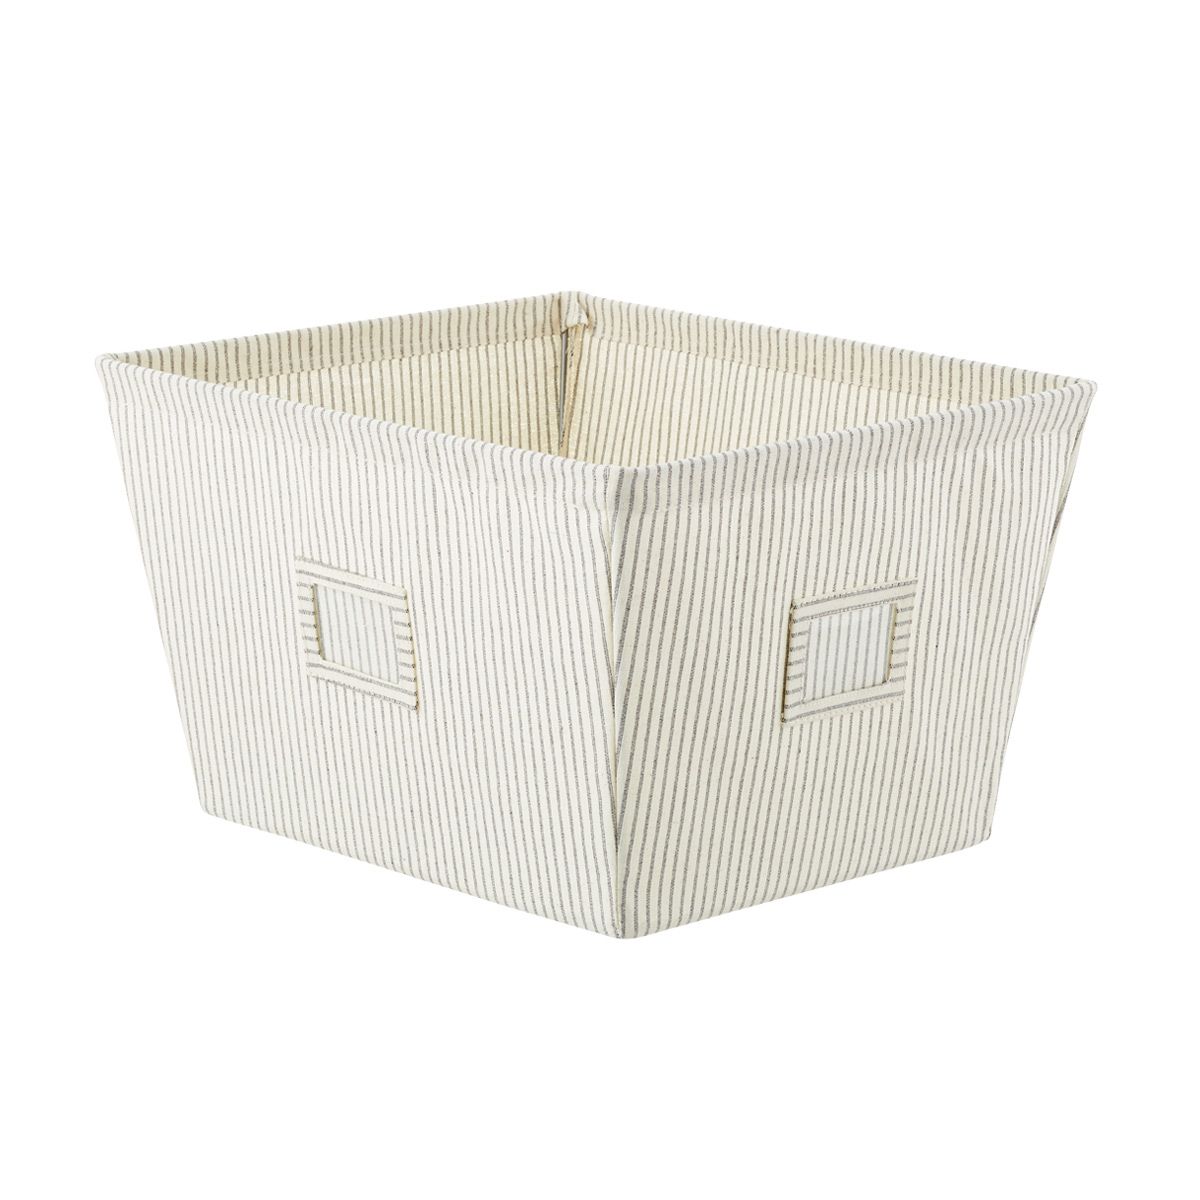 Fabric Open Storage Bin | The Container Store